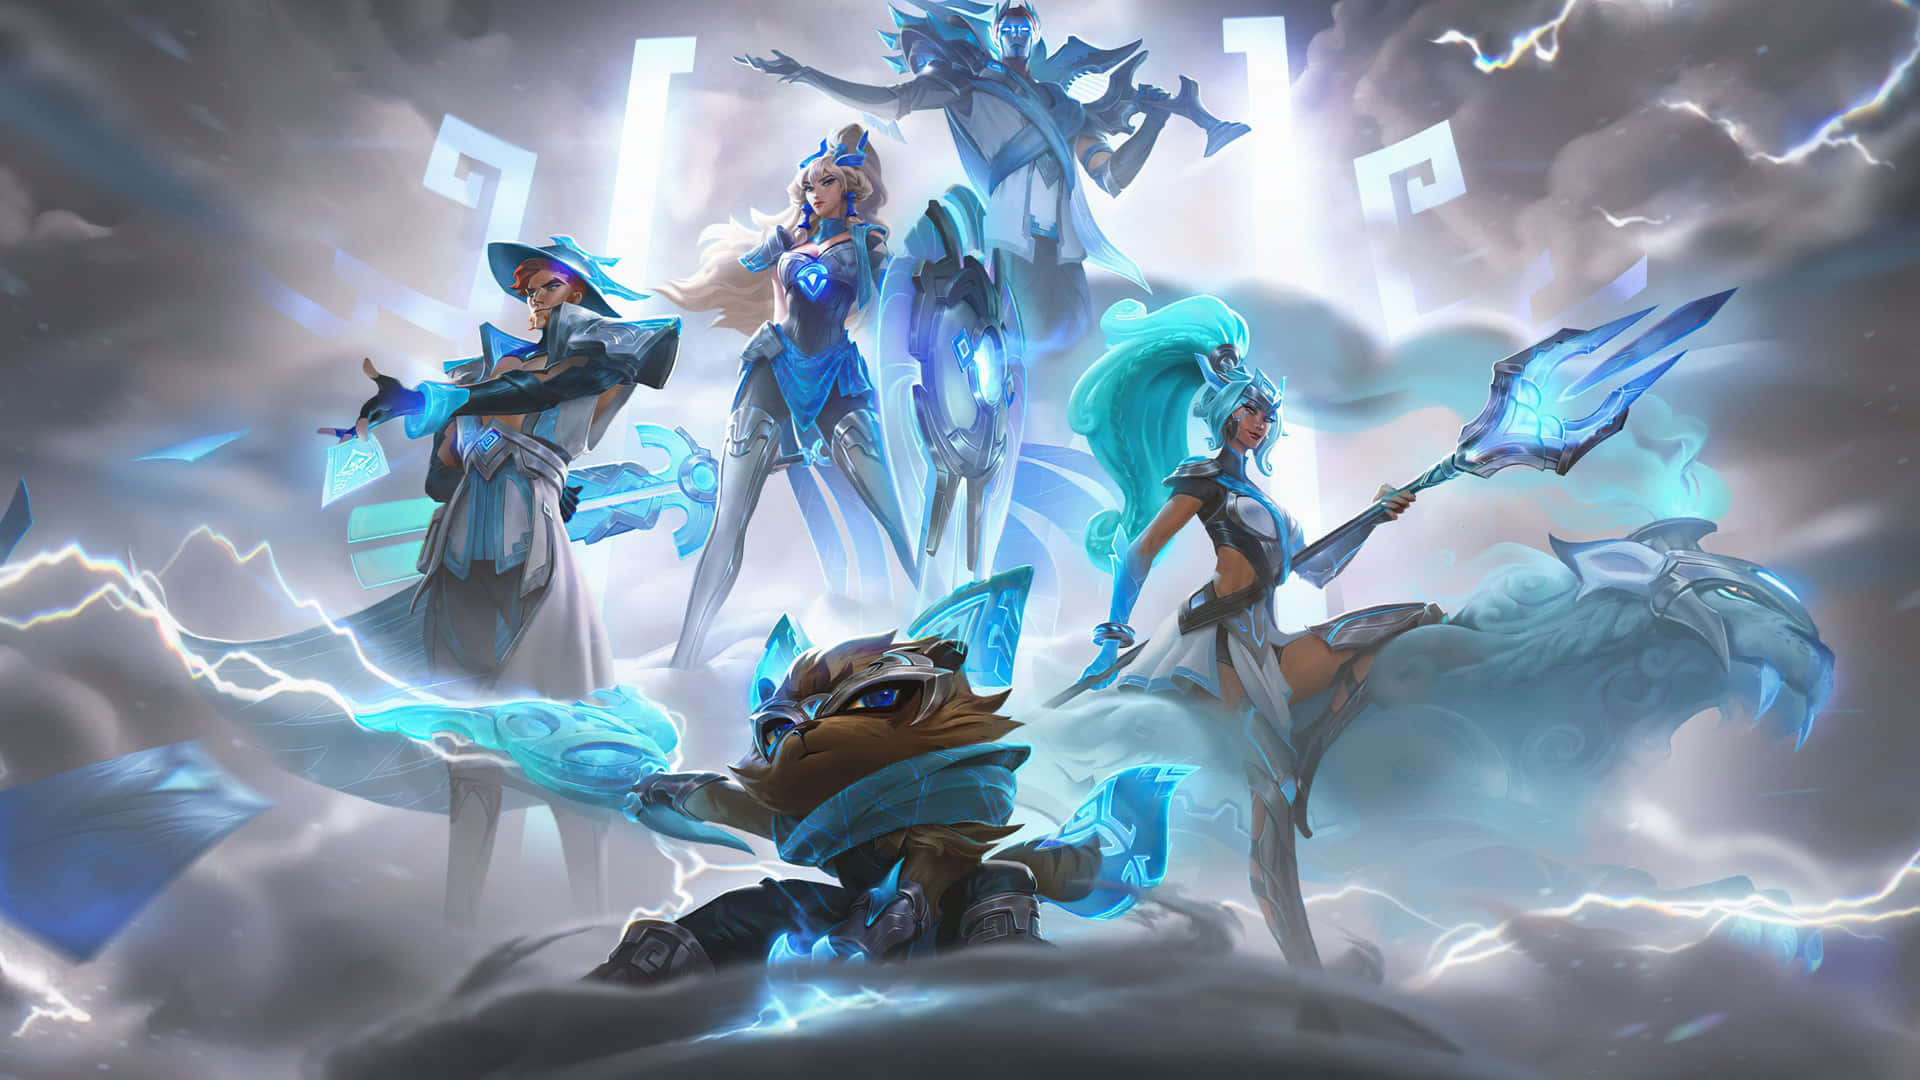 Experience League Of Legends like Never Before with this Amazing Laptop Wallpaper